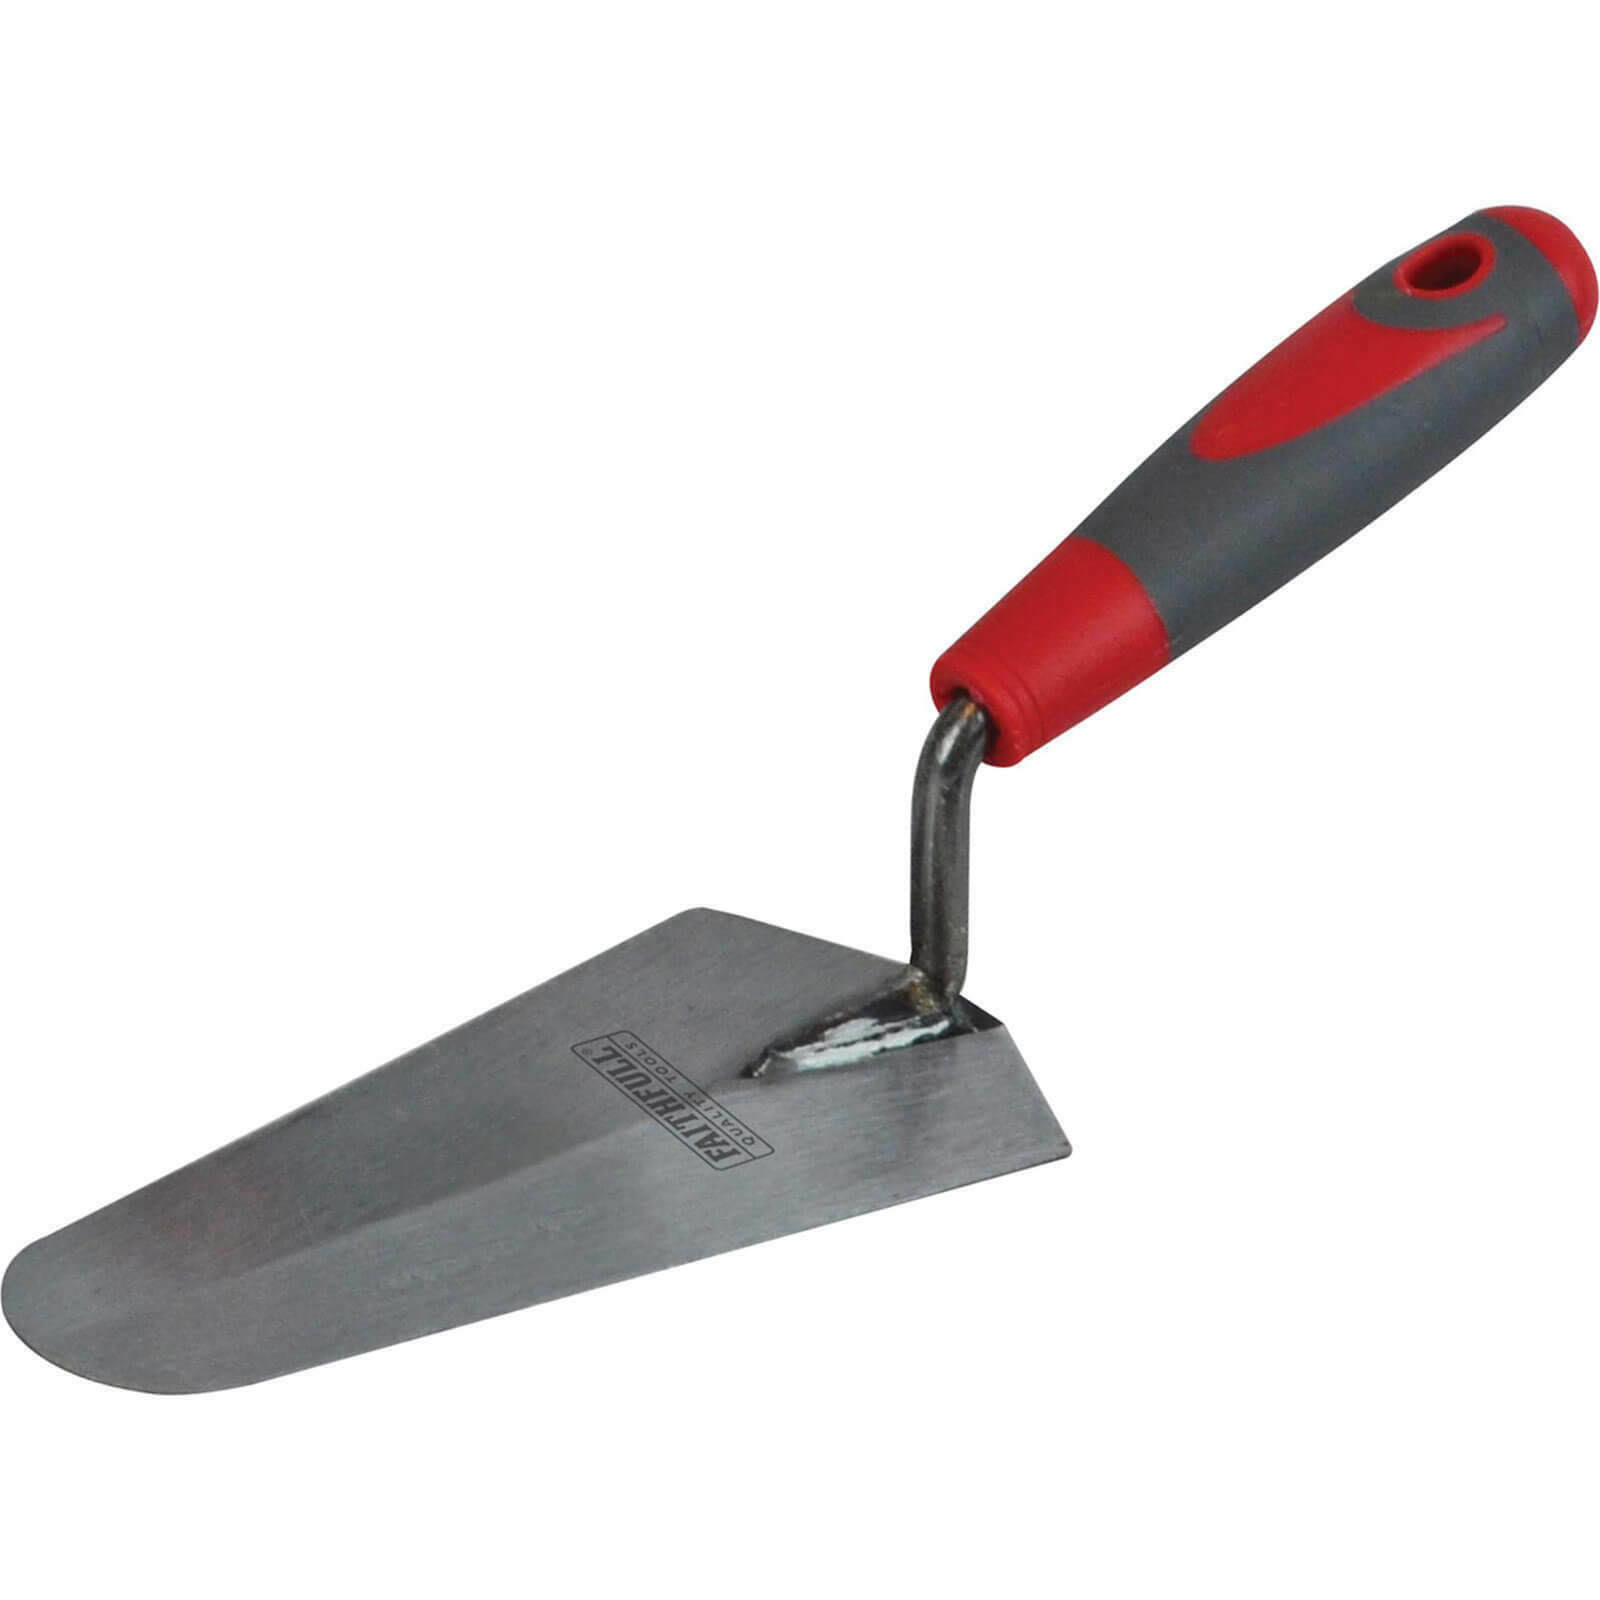 Faithfull Gauging Trowel with Soft Grip Handle - 175mm